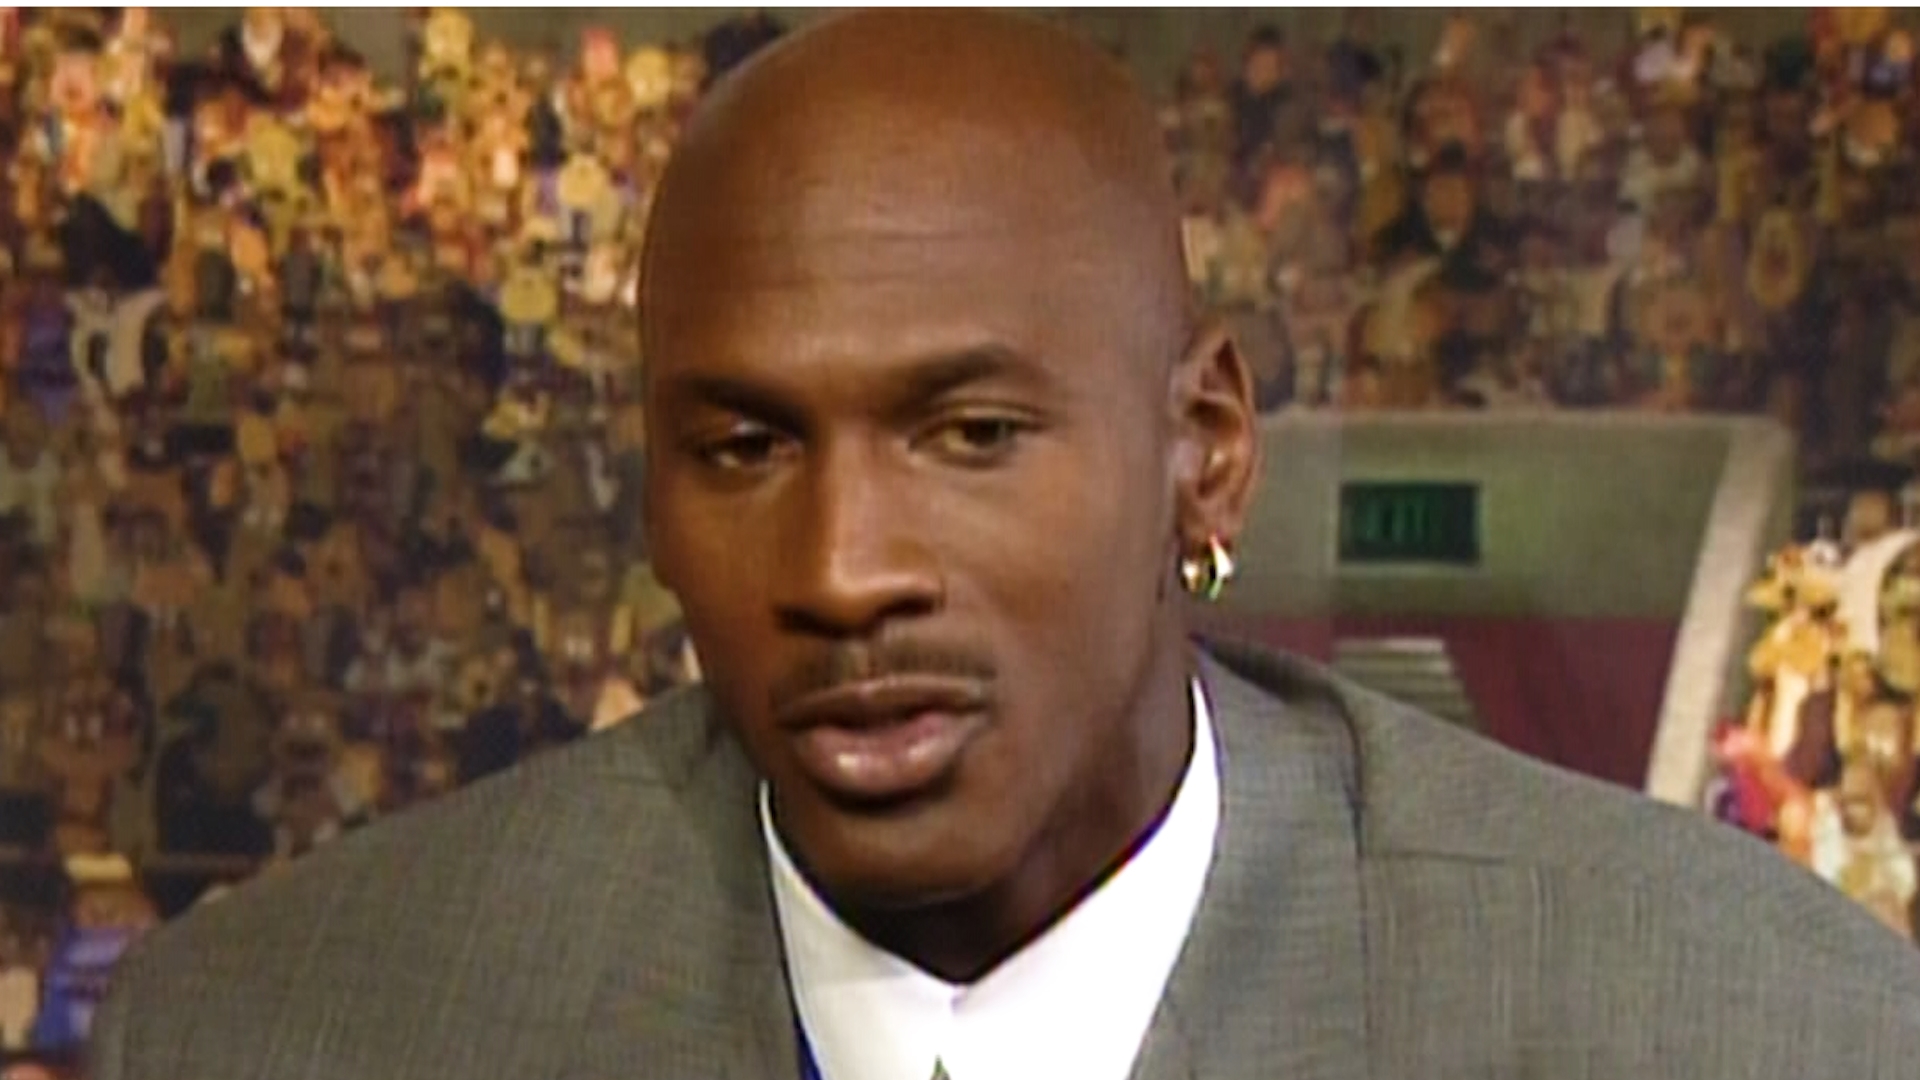 In this archived WFAA video, Michael Jordan sat down with WFAA to talk about what the message is for kids in the 1996 film Space Jam.